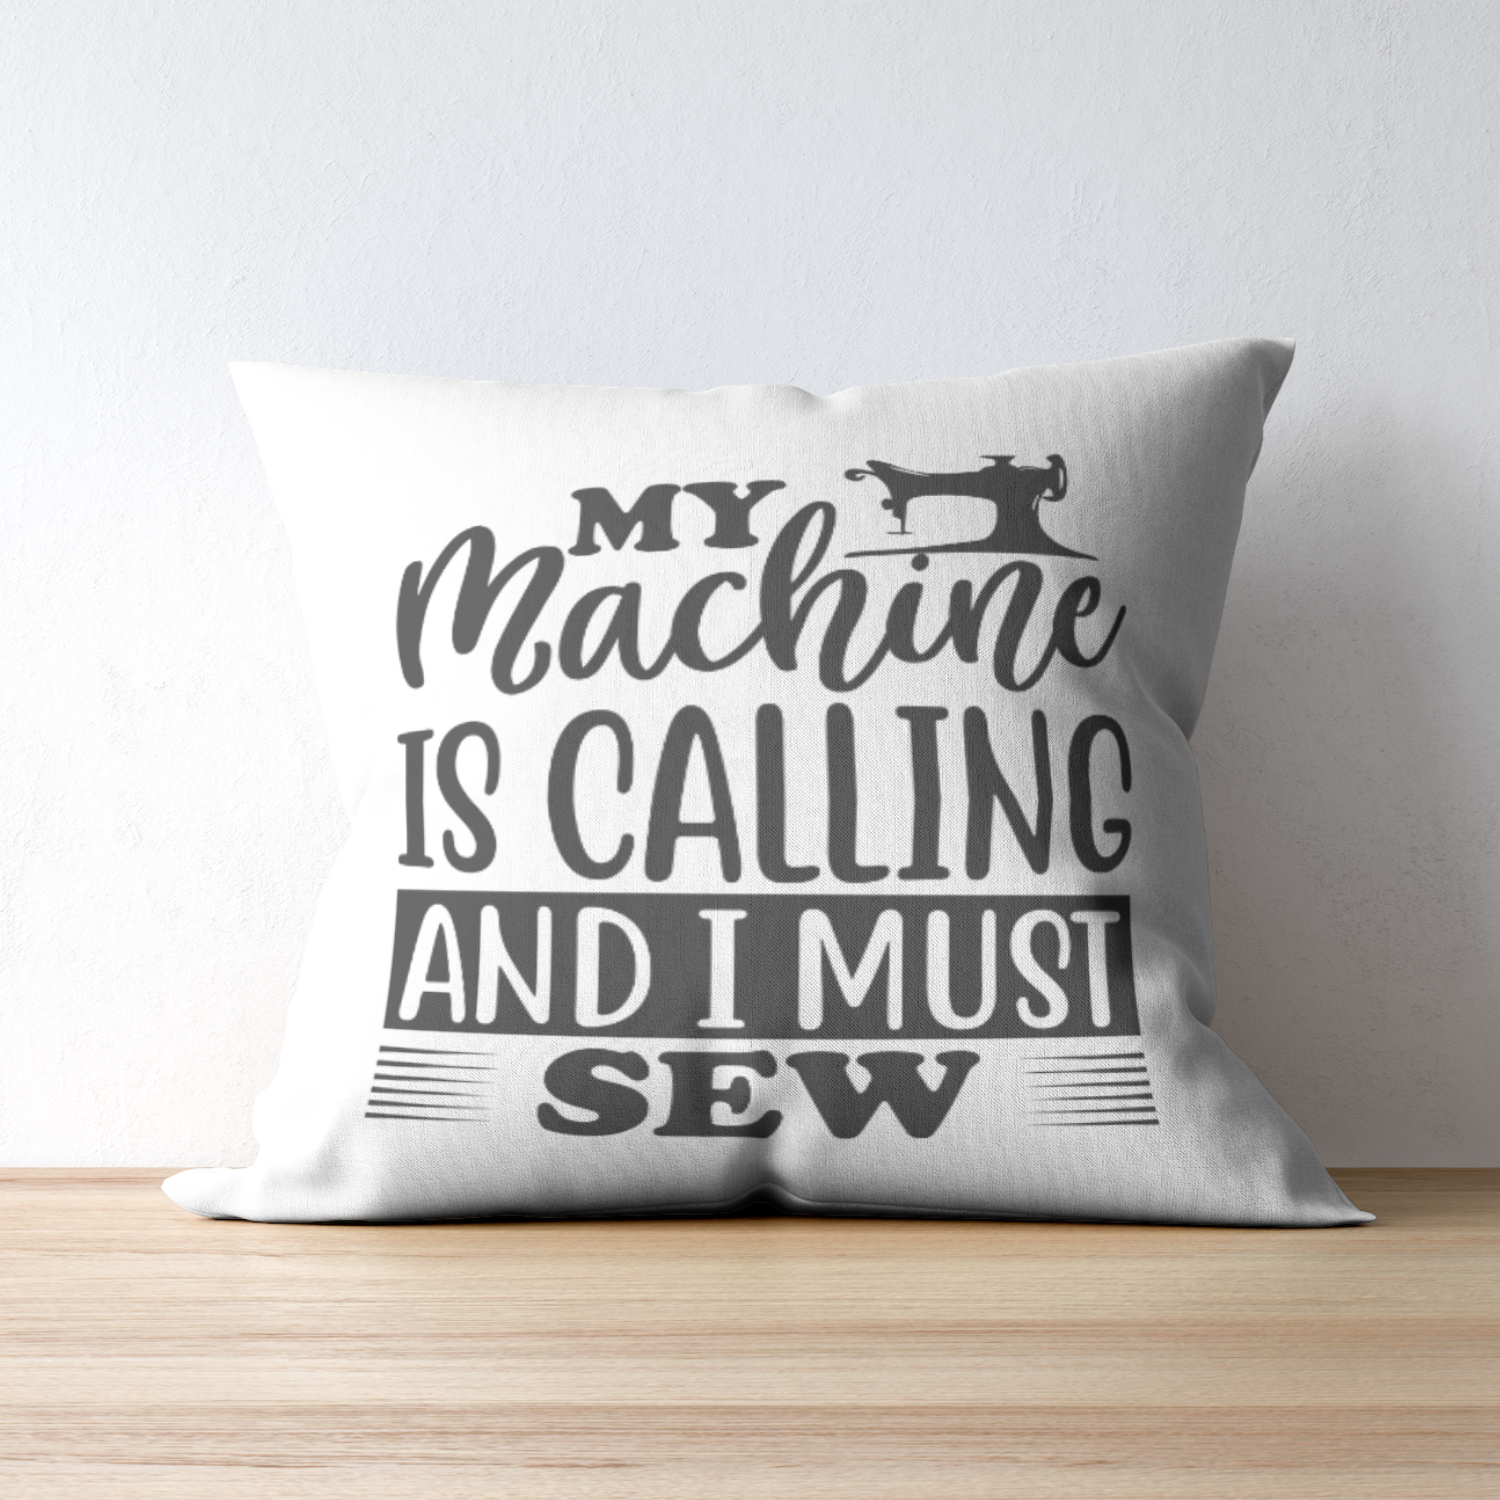 MY MACHINE IS CALLING AND I MUST SEW SVG | Digital Download | Cut File | SVG